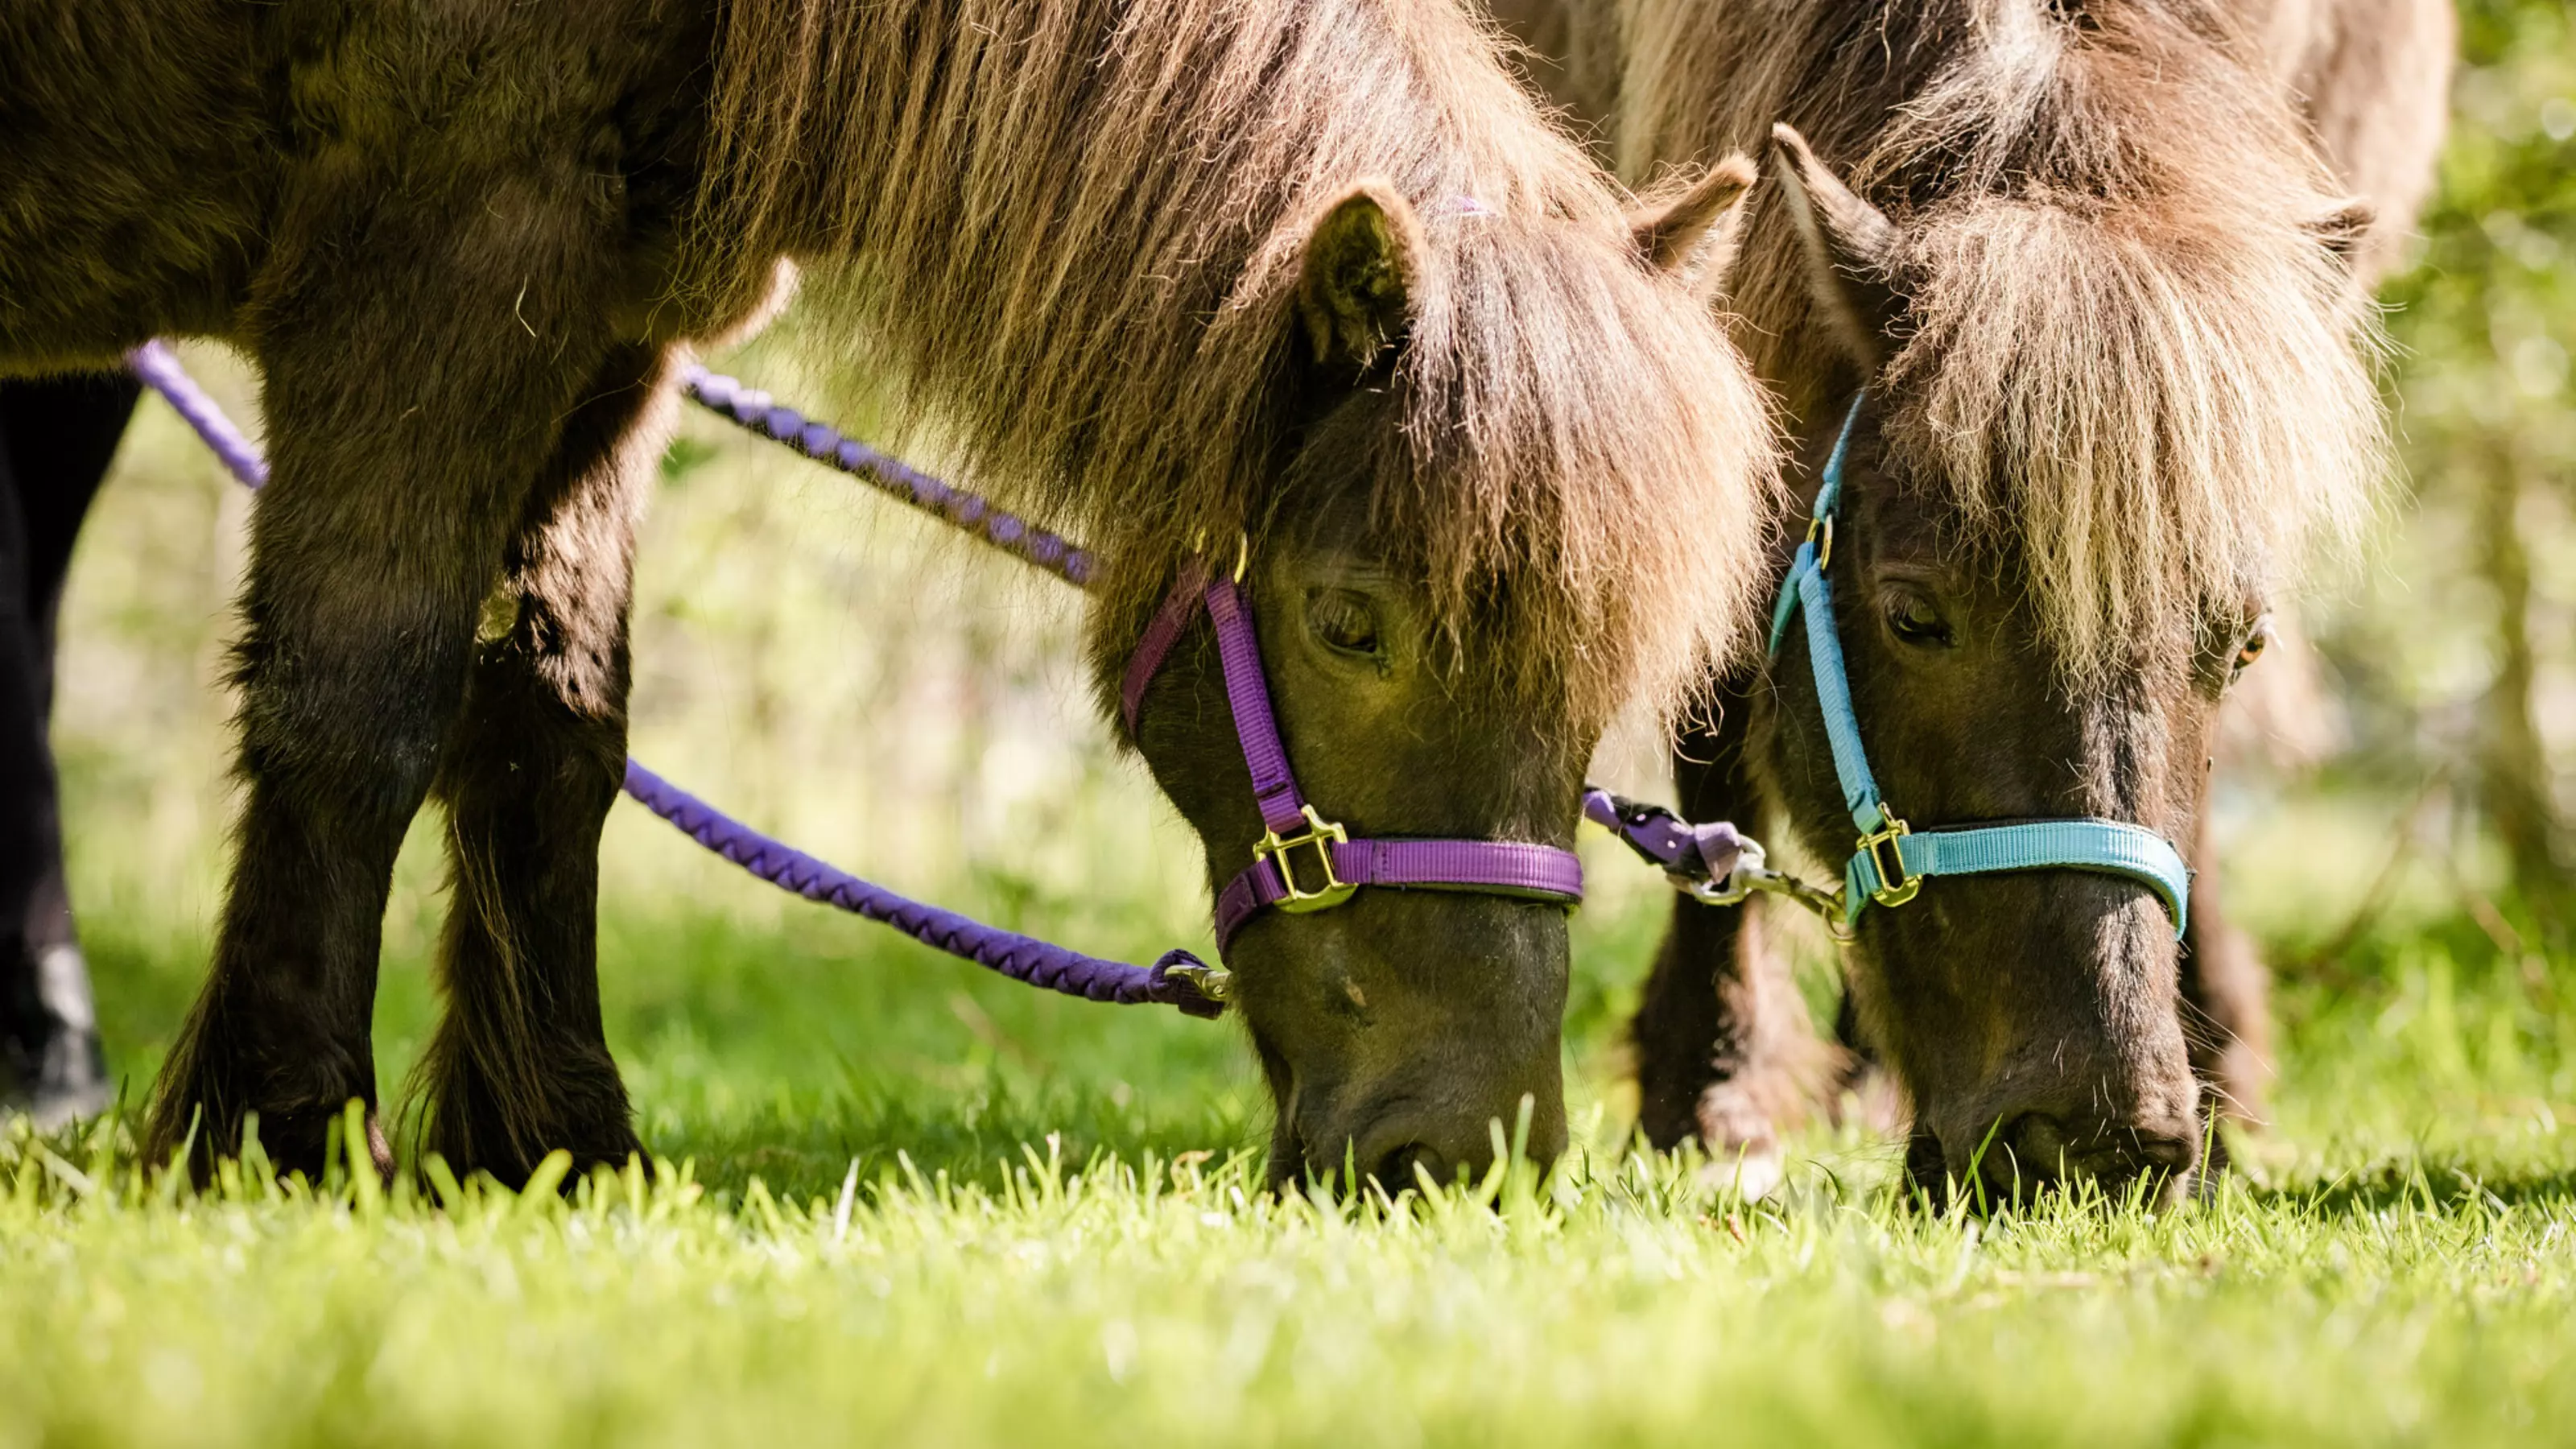 A close up of two brown ponies called treacle and candy in purple and blue reins, eating grass in a field